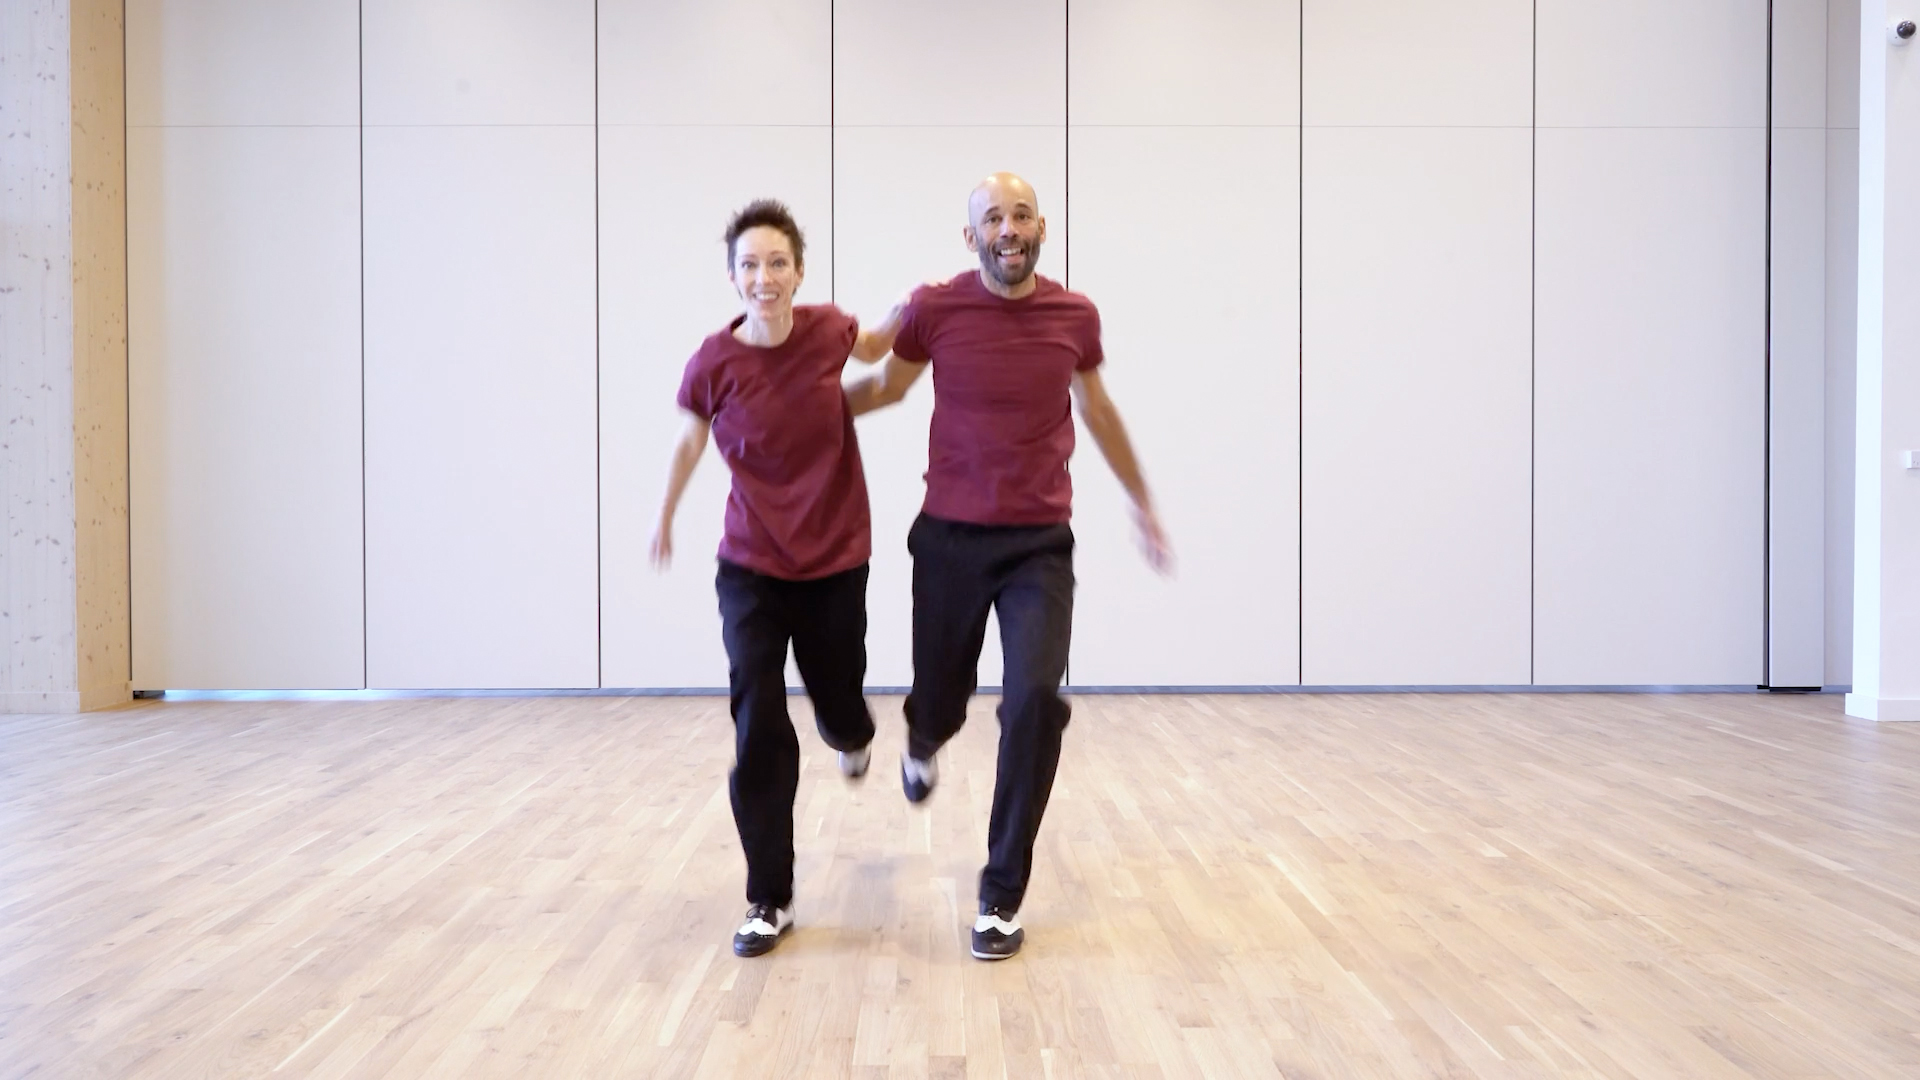 Lead & Follow Partner Work. Dance teachers Wendy Steatham, a short white woman with brown spiky hair, and Temujin Gill, a tall man with light brown skin and a shaved head, are dancing with one foot off the floor. Wendy's hand is on Tem's shoulder